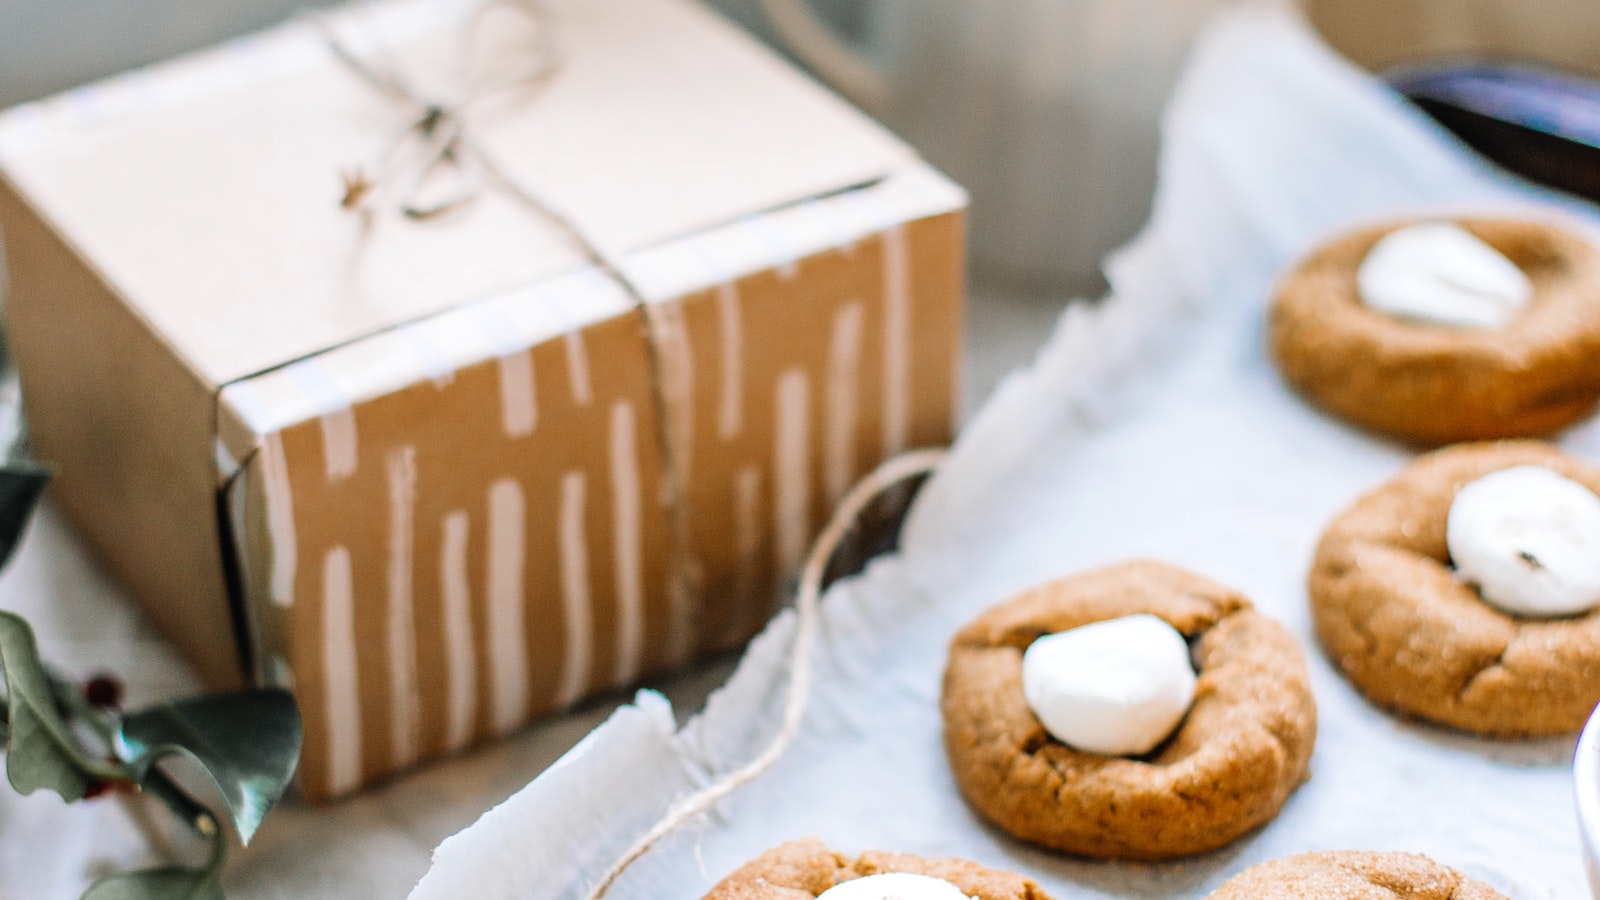 How to Keep Cookies Fresh for Shipping (and Eating)